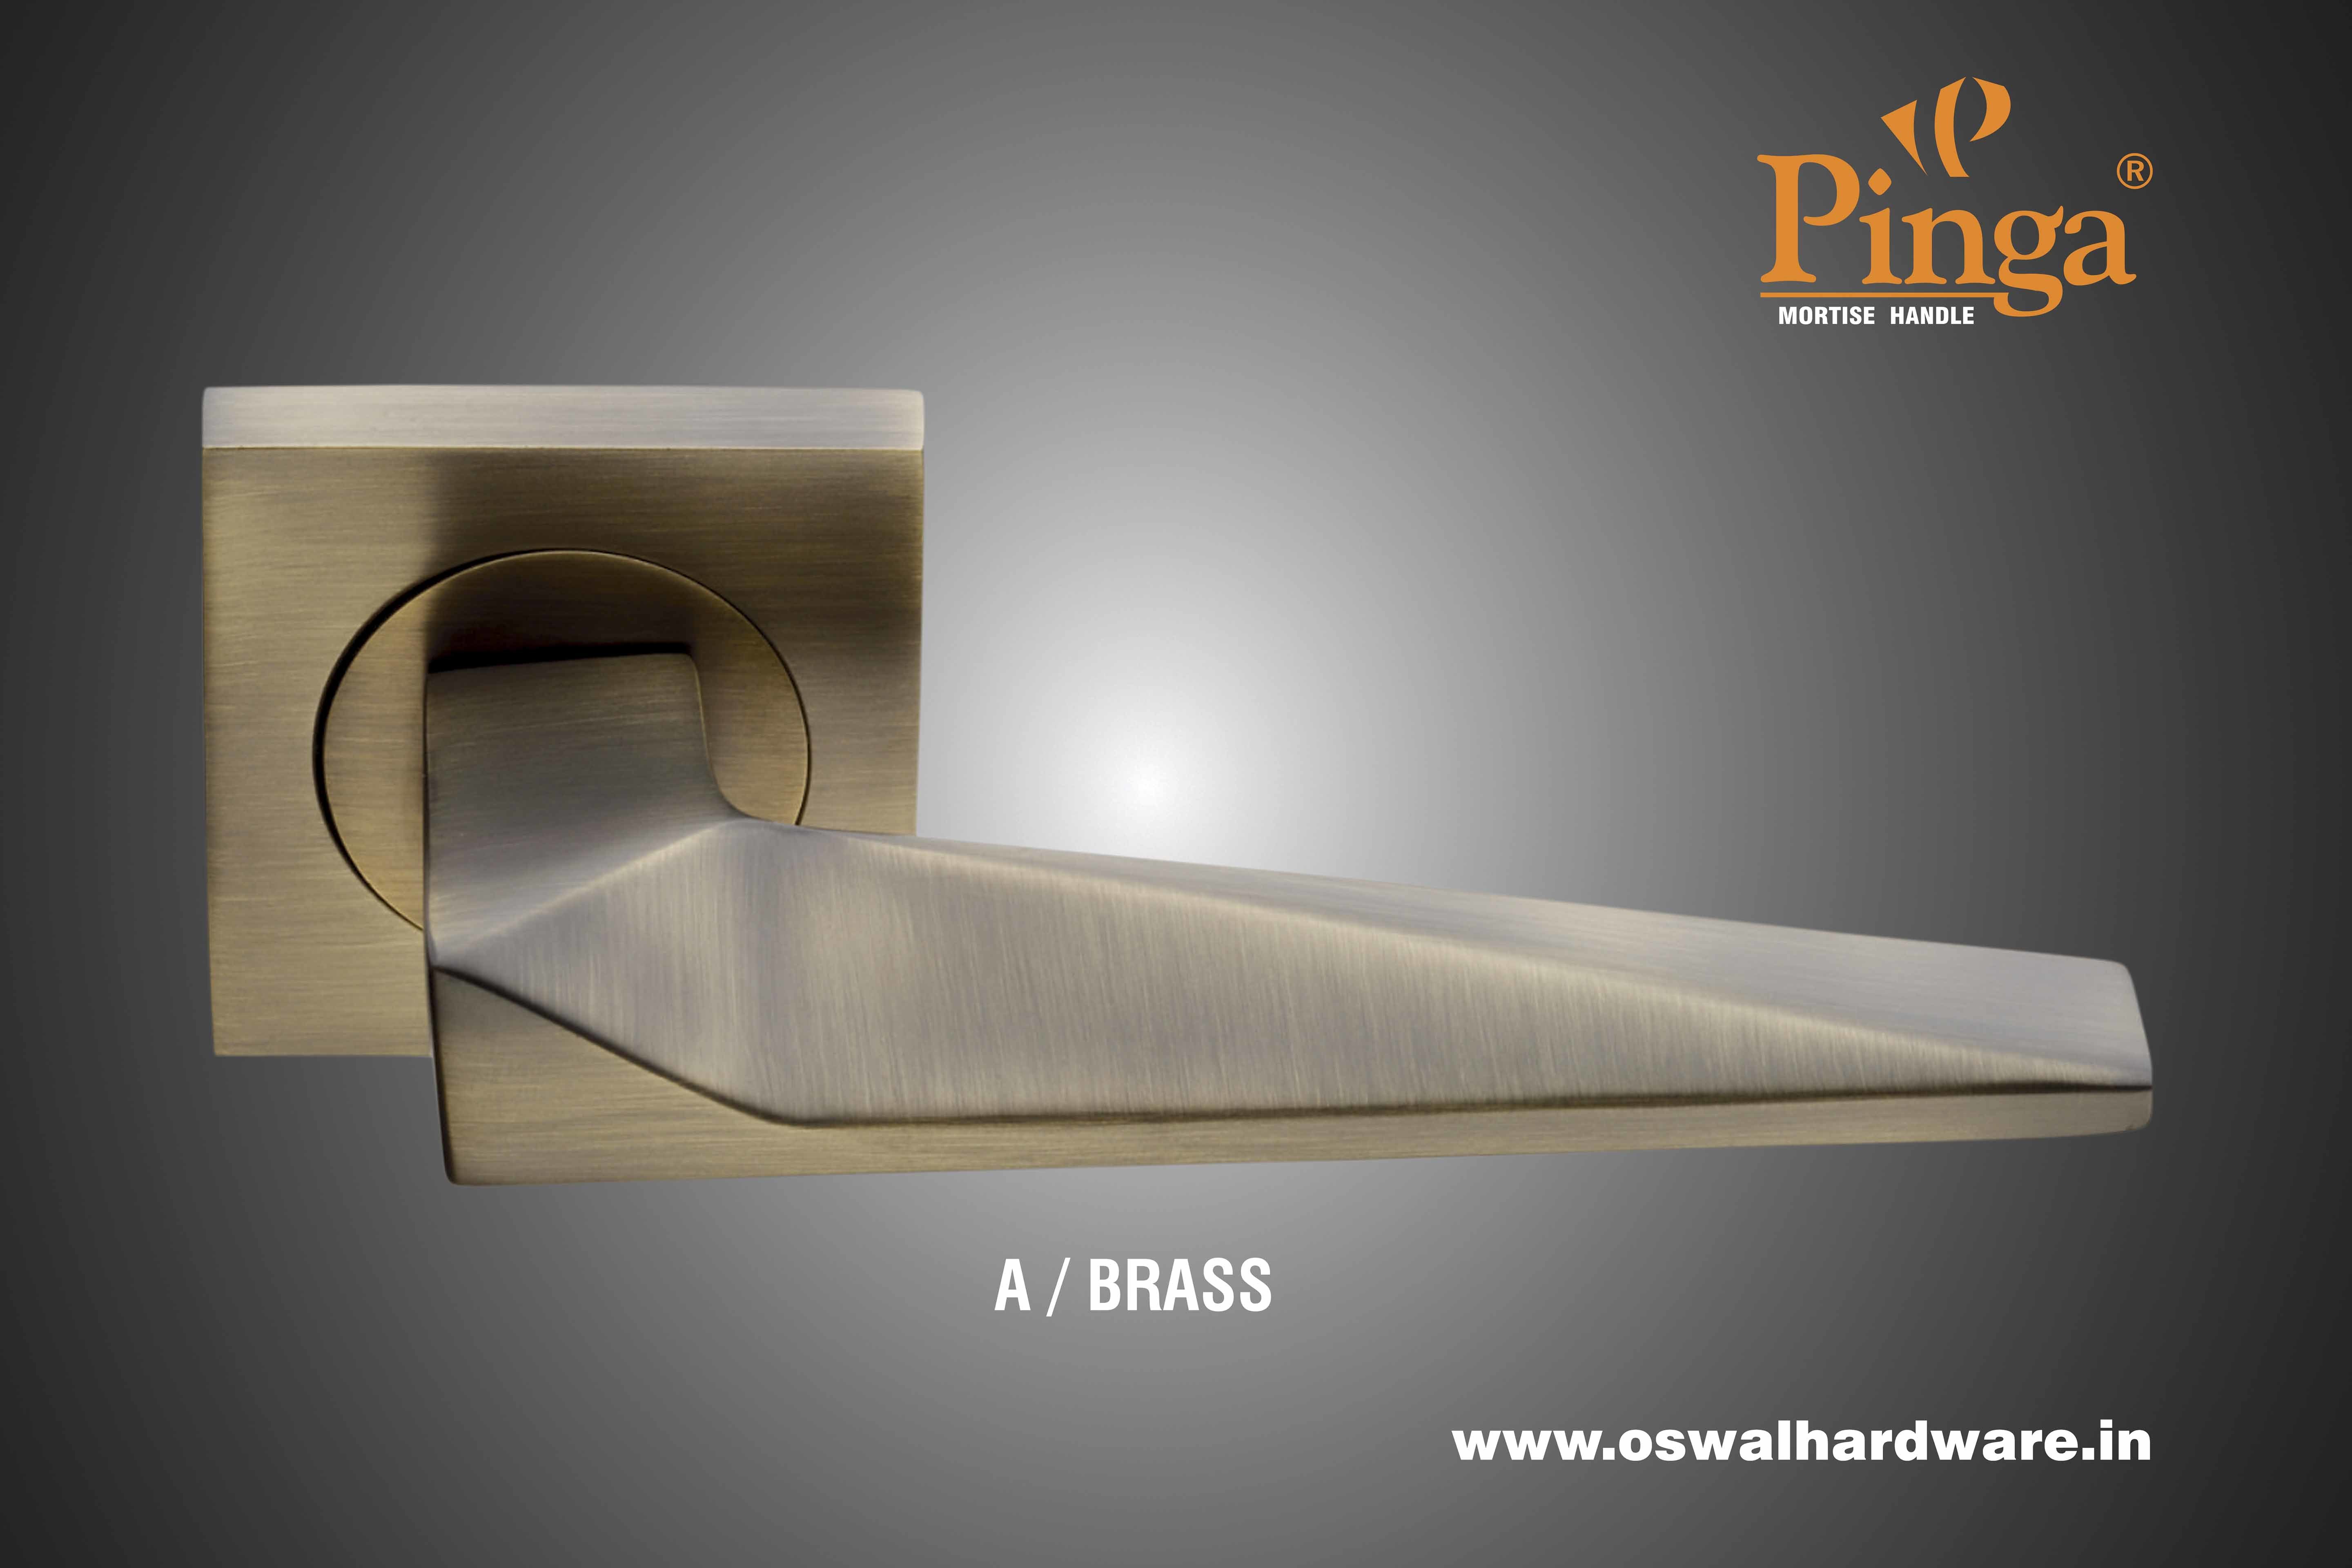 Mortise Handle Brass 2015